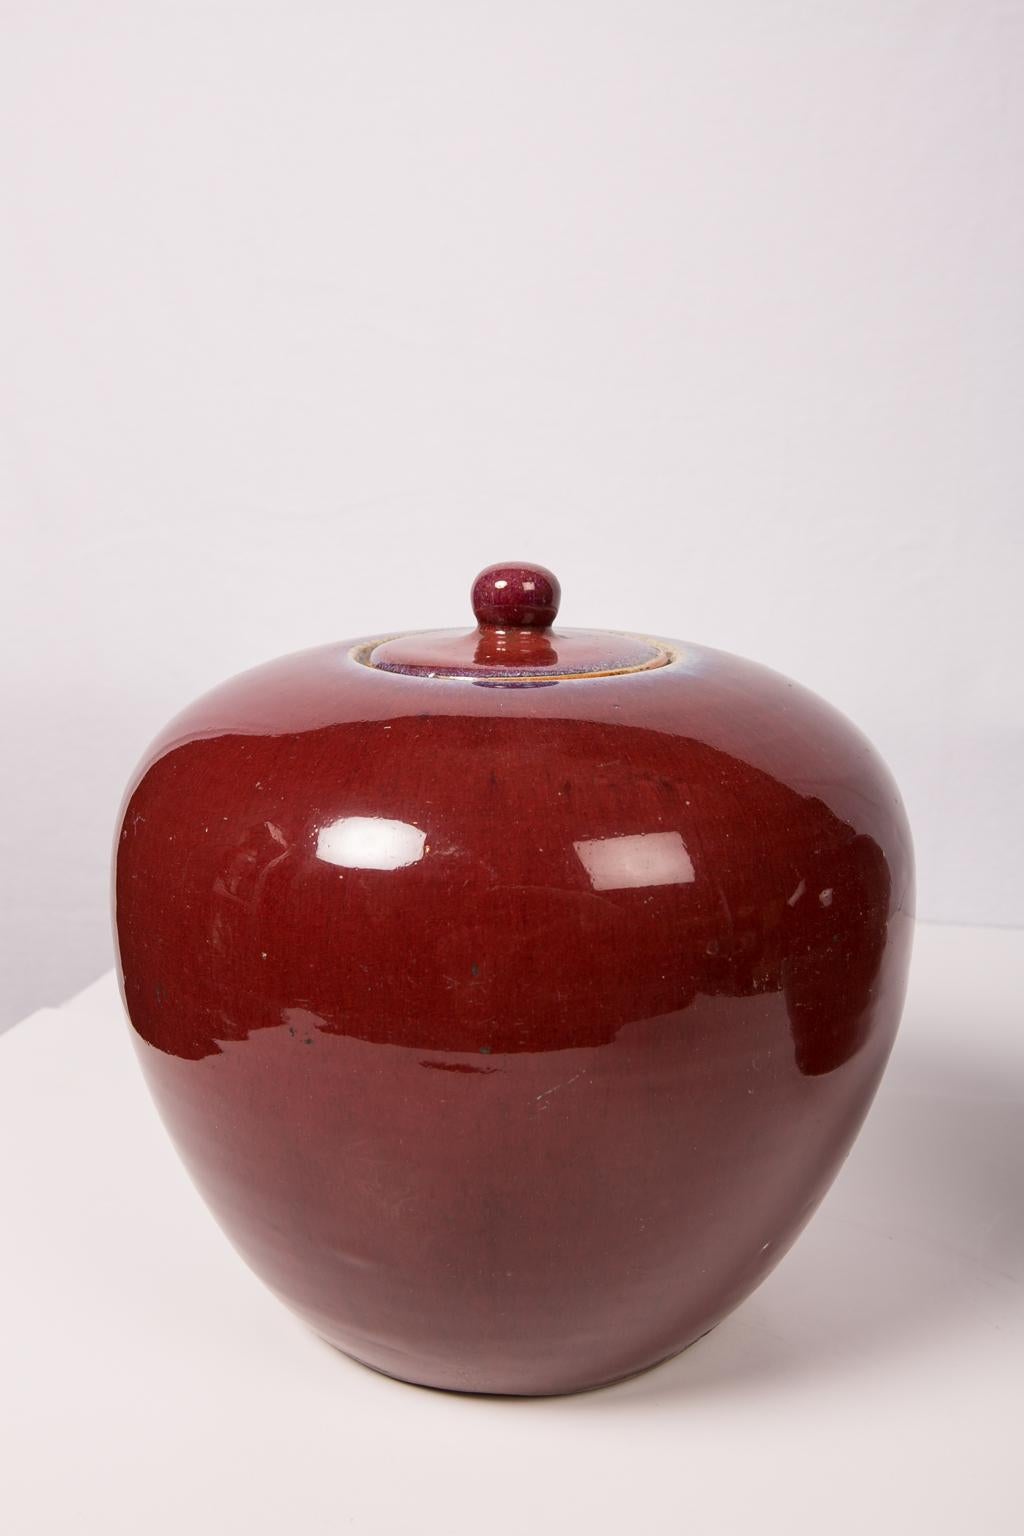 WHY WE LOVE THEM: Antique but yet so Modern!
We are pleased to offer this pair of Chinese monochrome red ( sang-de-boeuf ) ginger jars dated to Xianfeng and Tongzhi periods. (1831-1875). The warm, deep red glaze is rich and fully covers the body of